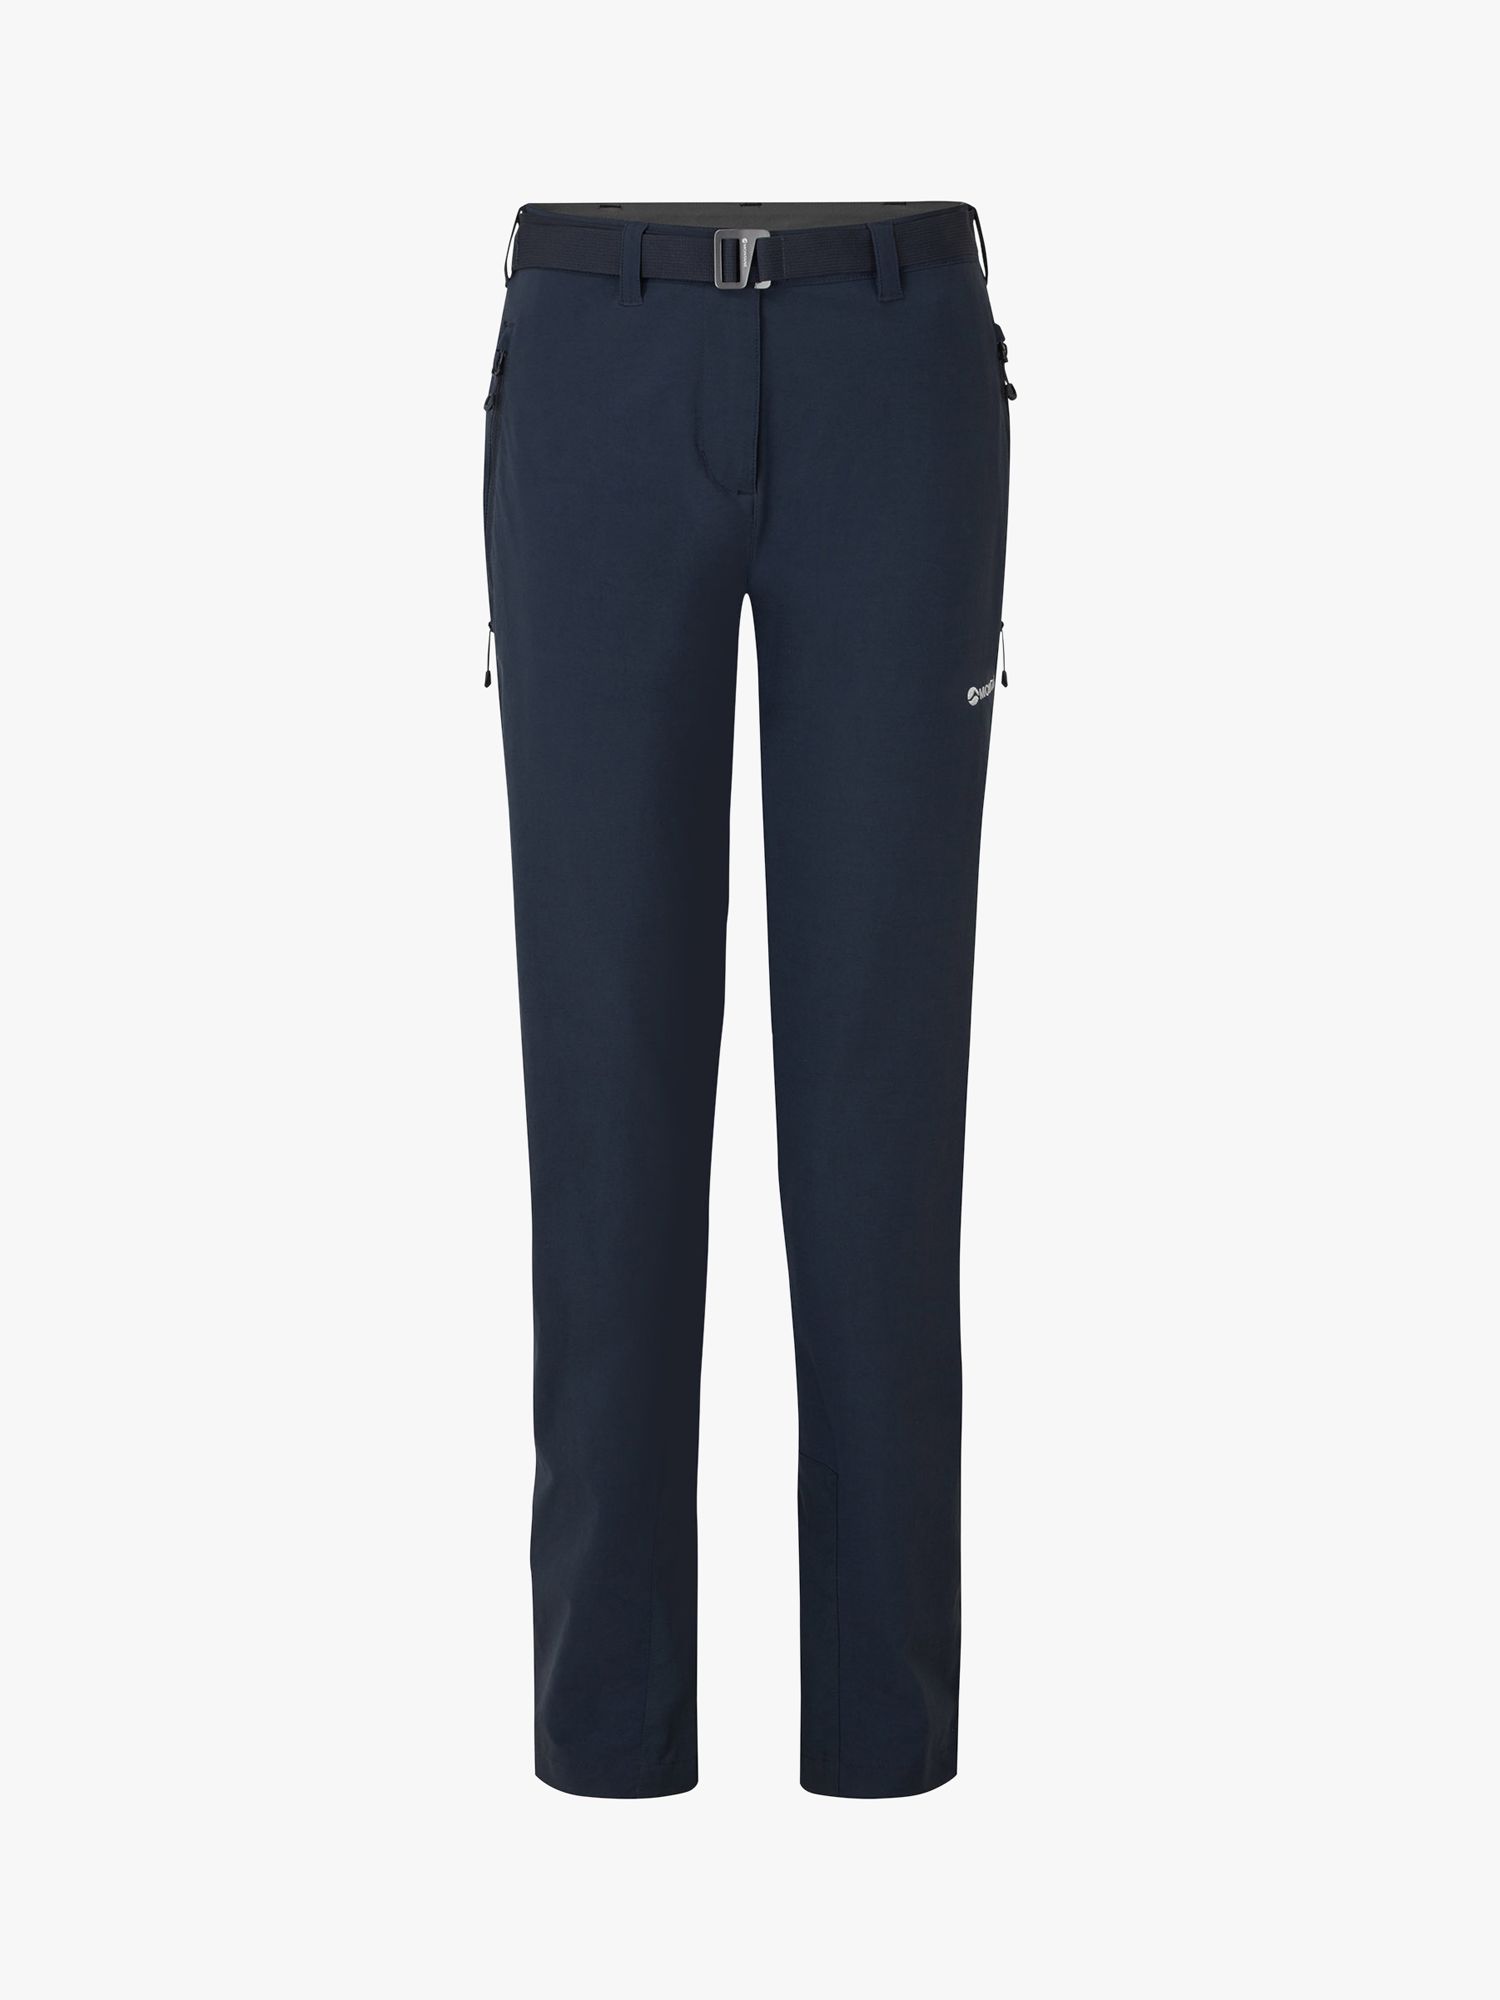 Buy Montane Terra Stretch Trousers Online at johnlewis.com